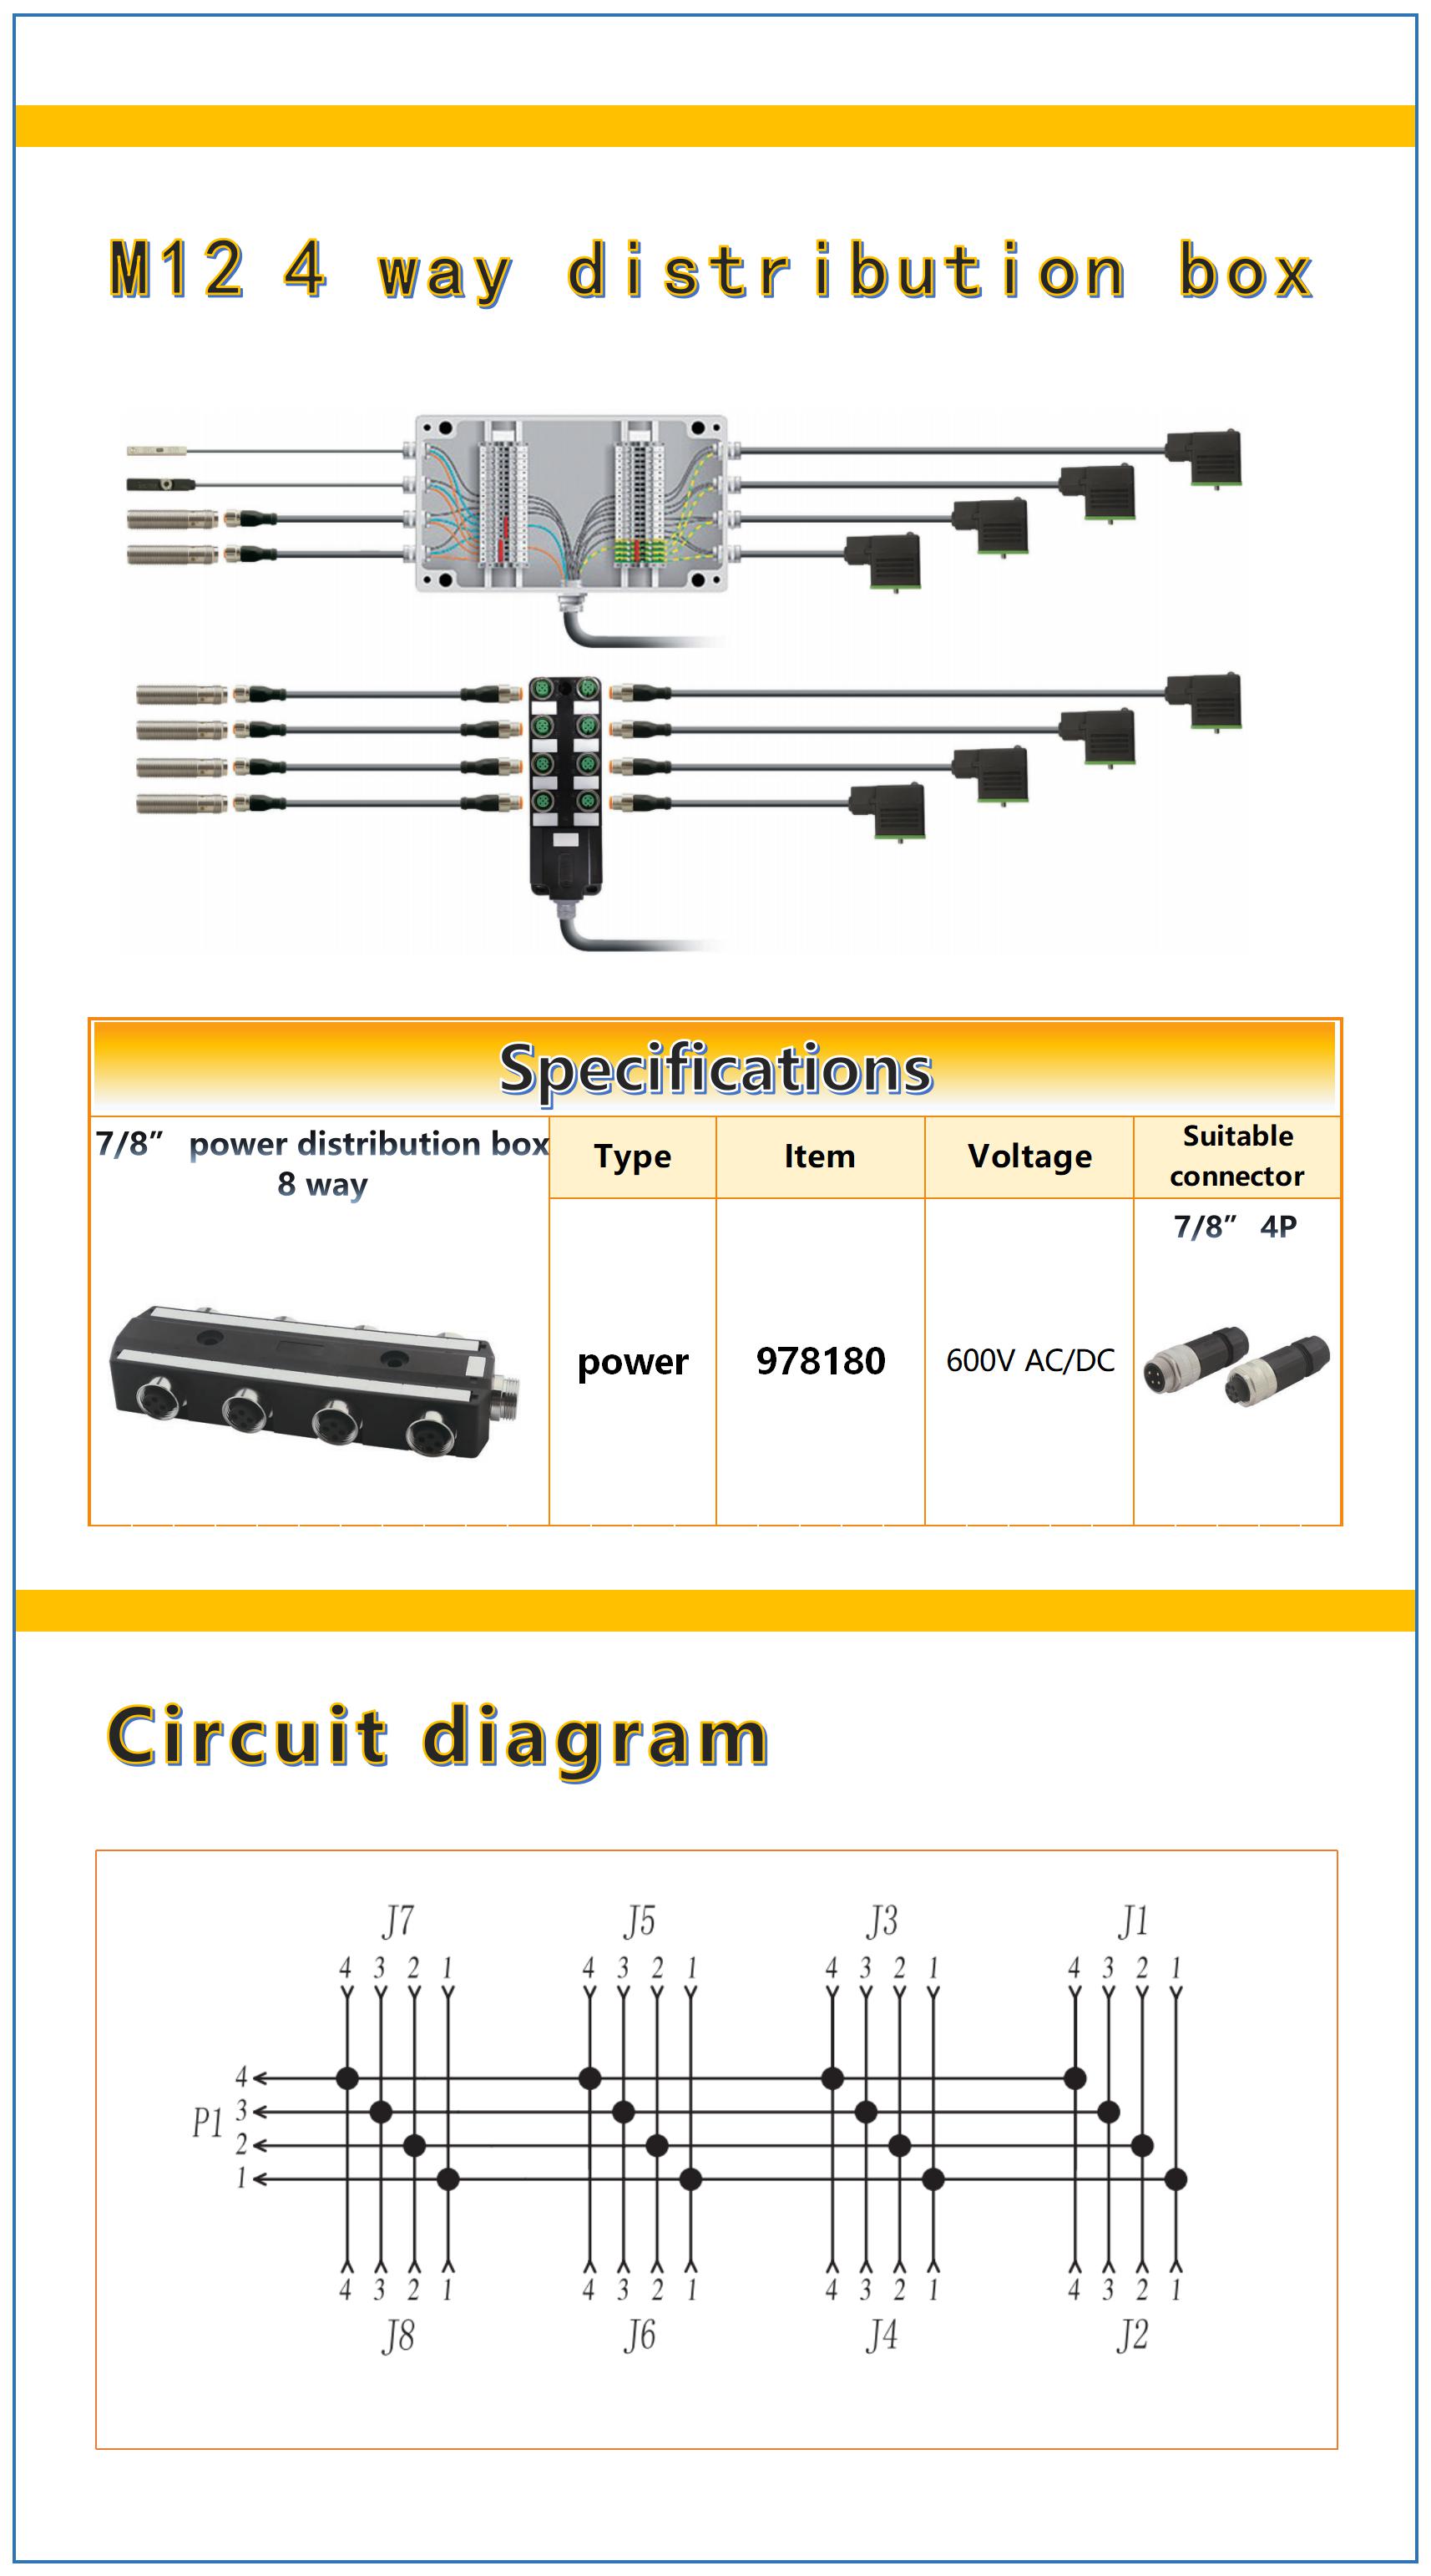 power distribution box 8 way specifications